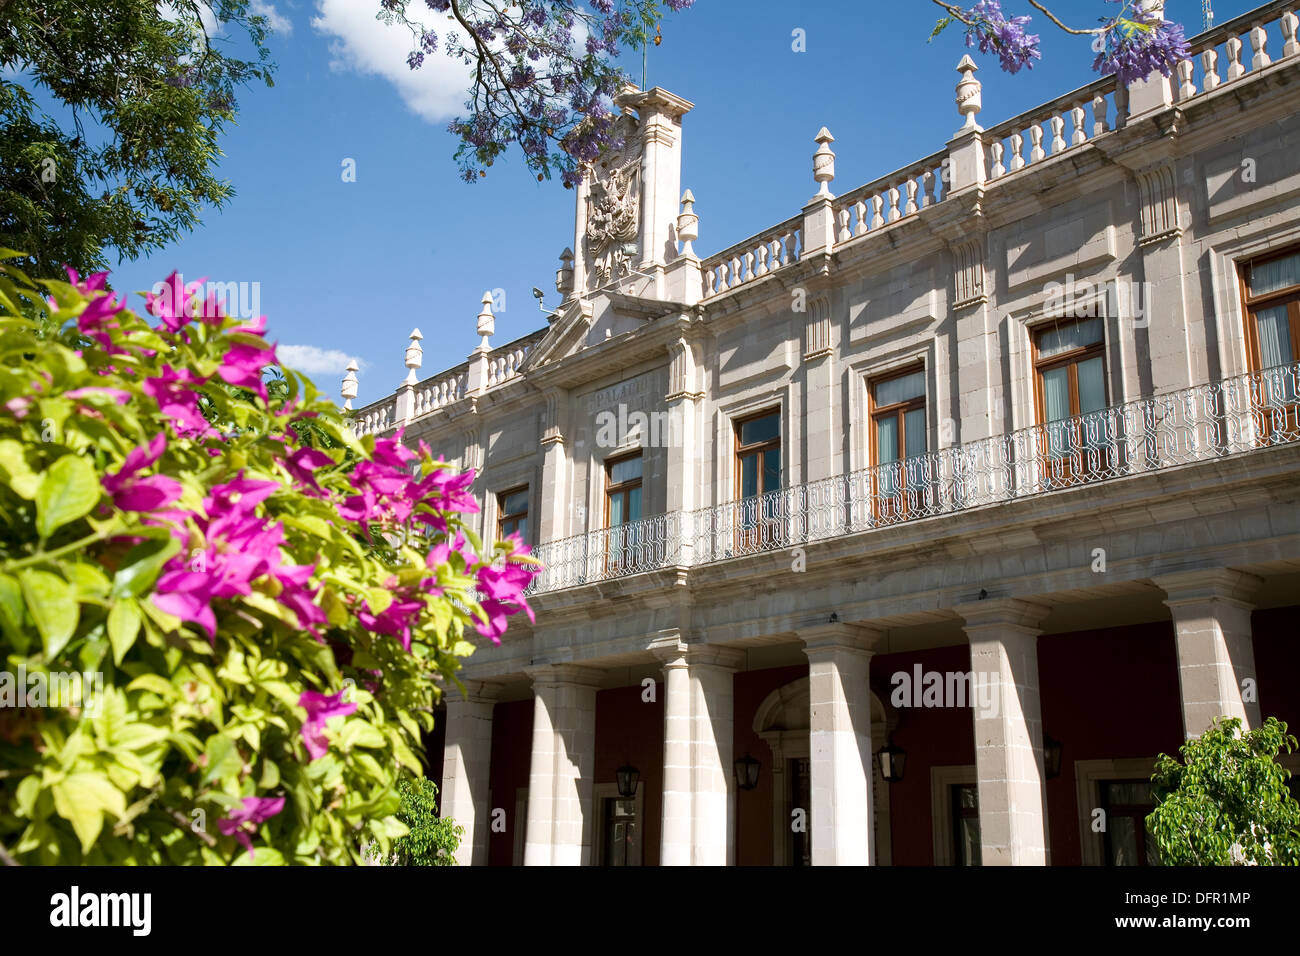 Regal mansions encircle Jardin de San Marcos, one of many fine parks and gardens in Aguascalientes, Mexico. Stock Photo